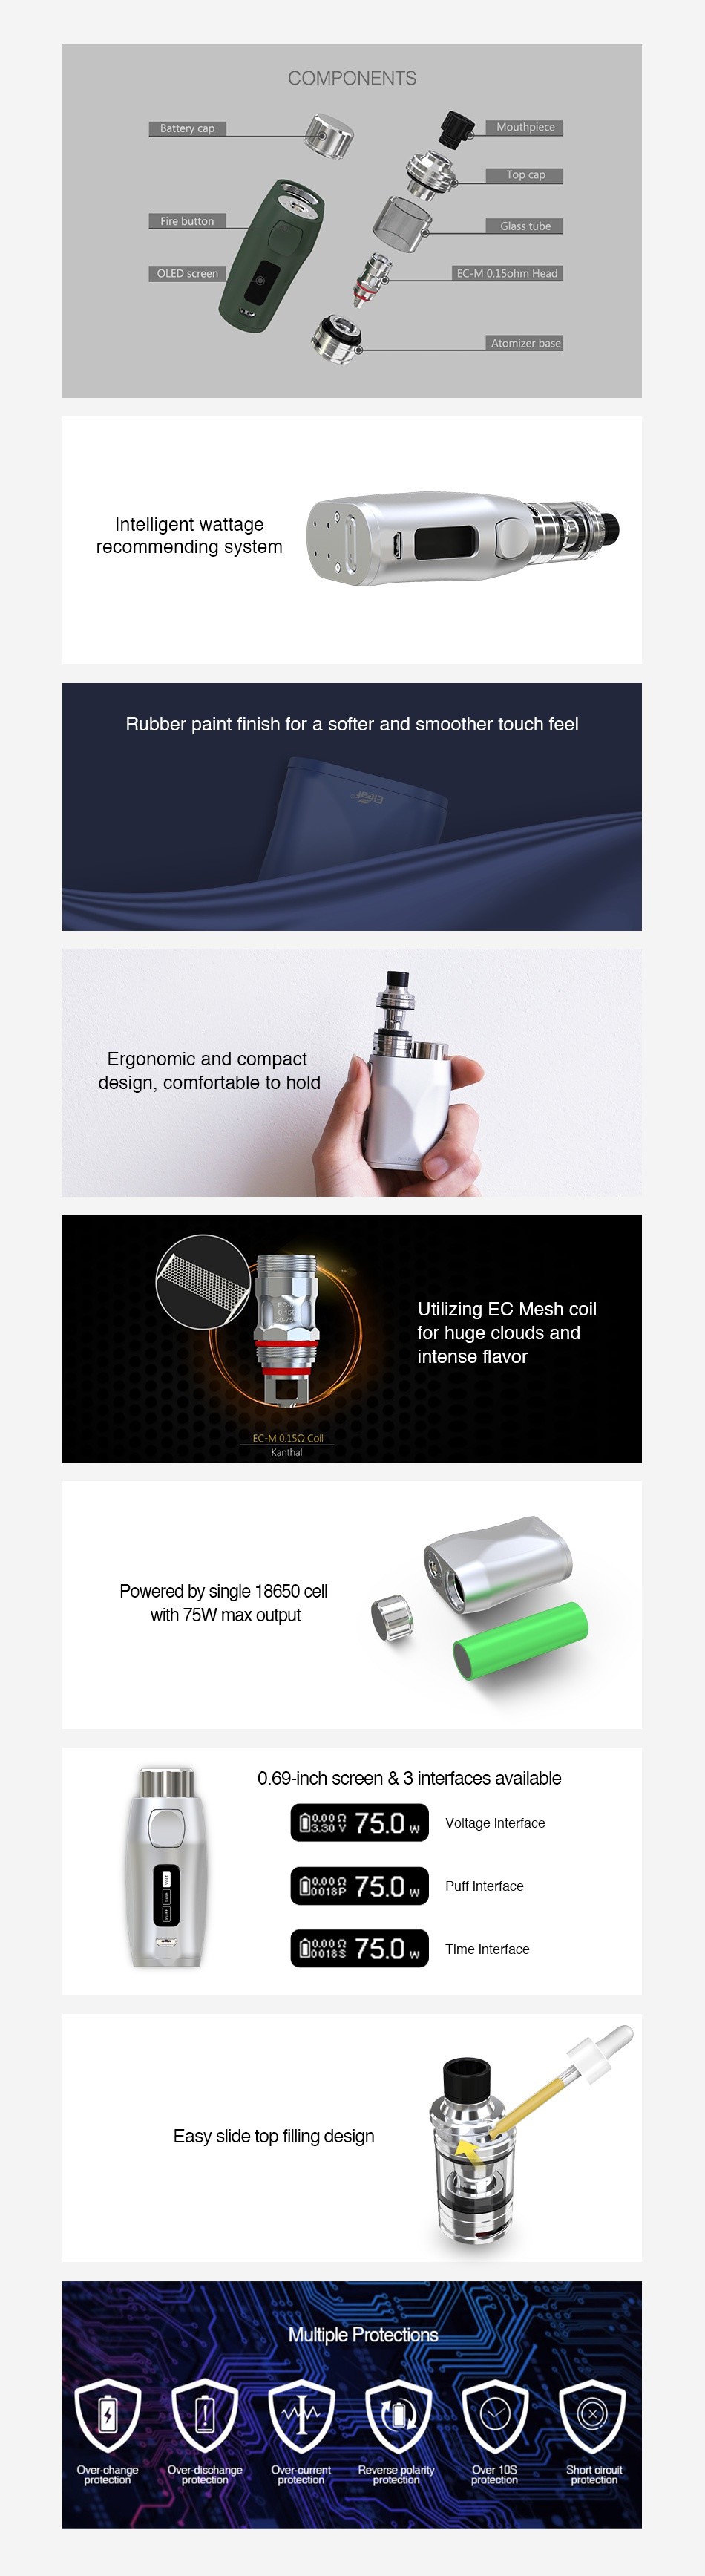 Eleaf iStick Pico X 75W TC Kit with Melo 4 Atomizer COMPONENTS recommending system Rubber paint finish for a softer and smoother touch feel Ergonomic and compact uT design  comfortable to hold Powered by single 18650 cell with 75w max outout 0 69 inch screen 3 interfaces available 938750Wme 88750w Puff interlace 10018975 0 w Time interface Multiple Protecti